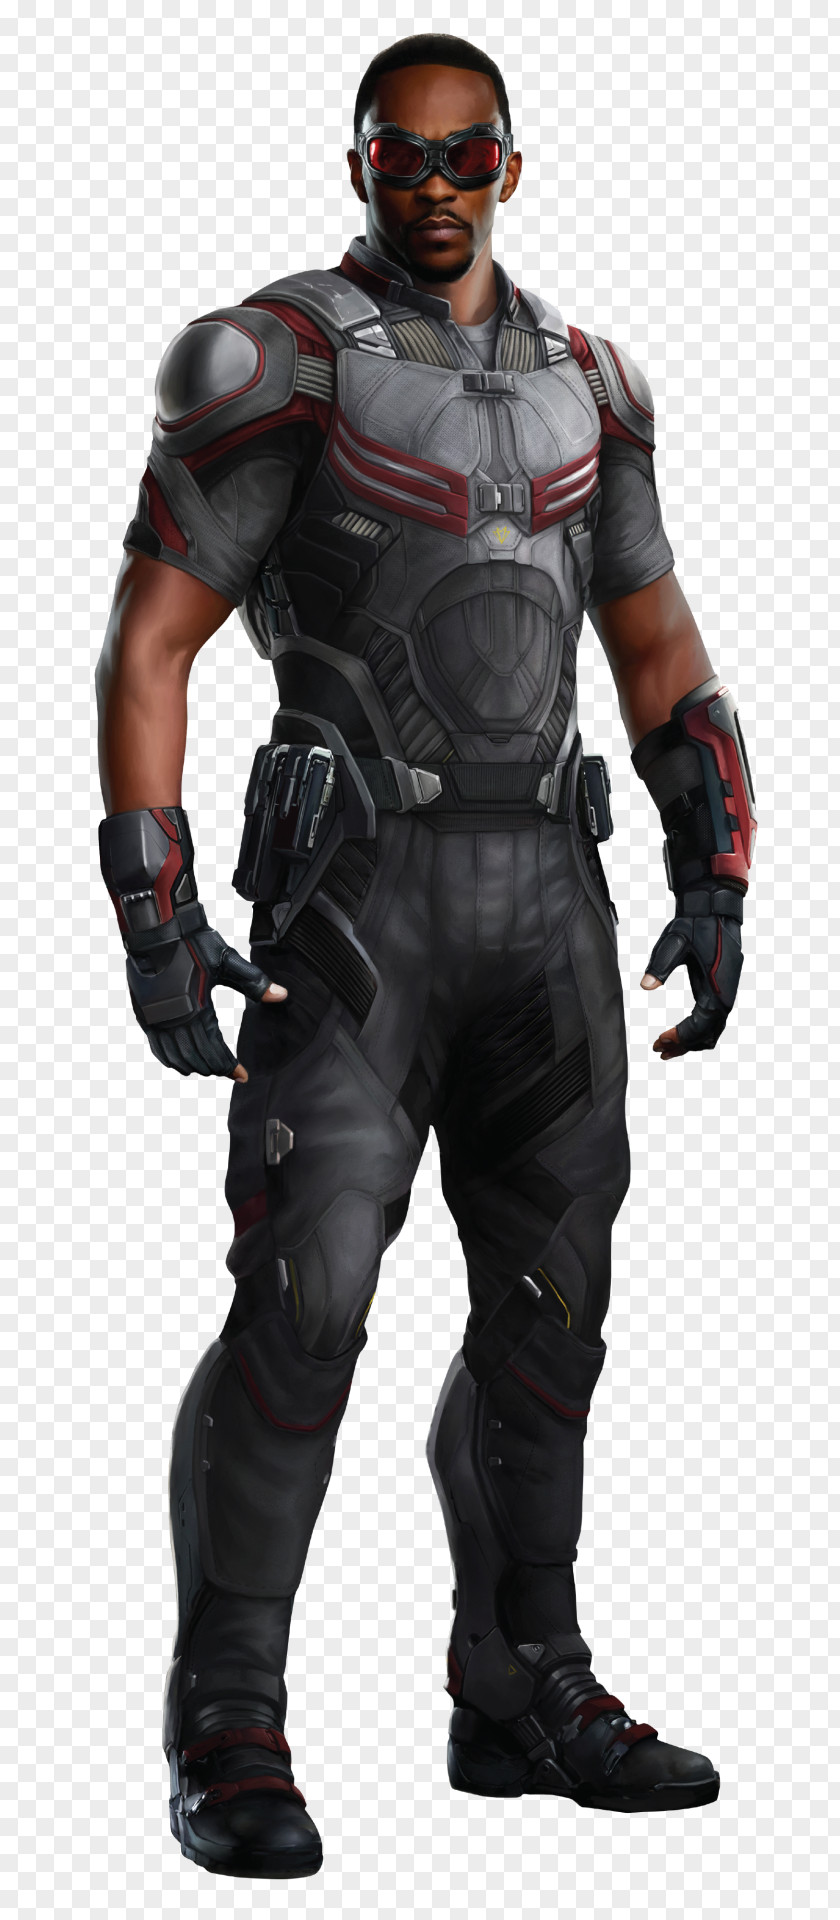 Guardians Of The Galaxy Anthony Mackie Falcon Avengers: Age Ultron Nick Fury Vision PNG